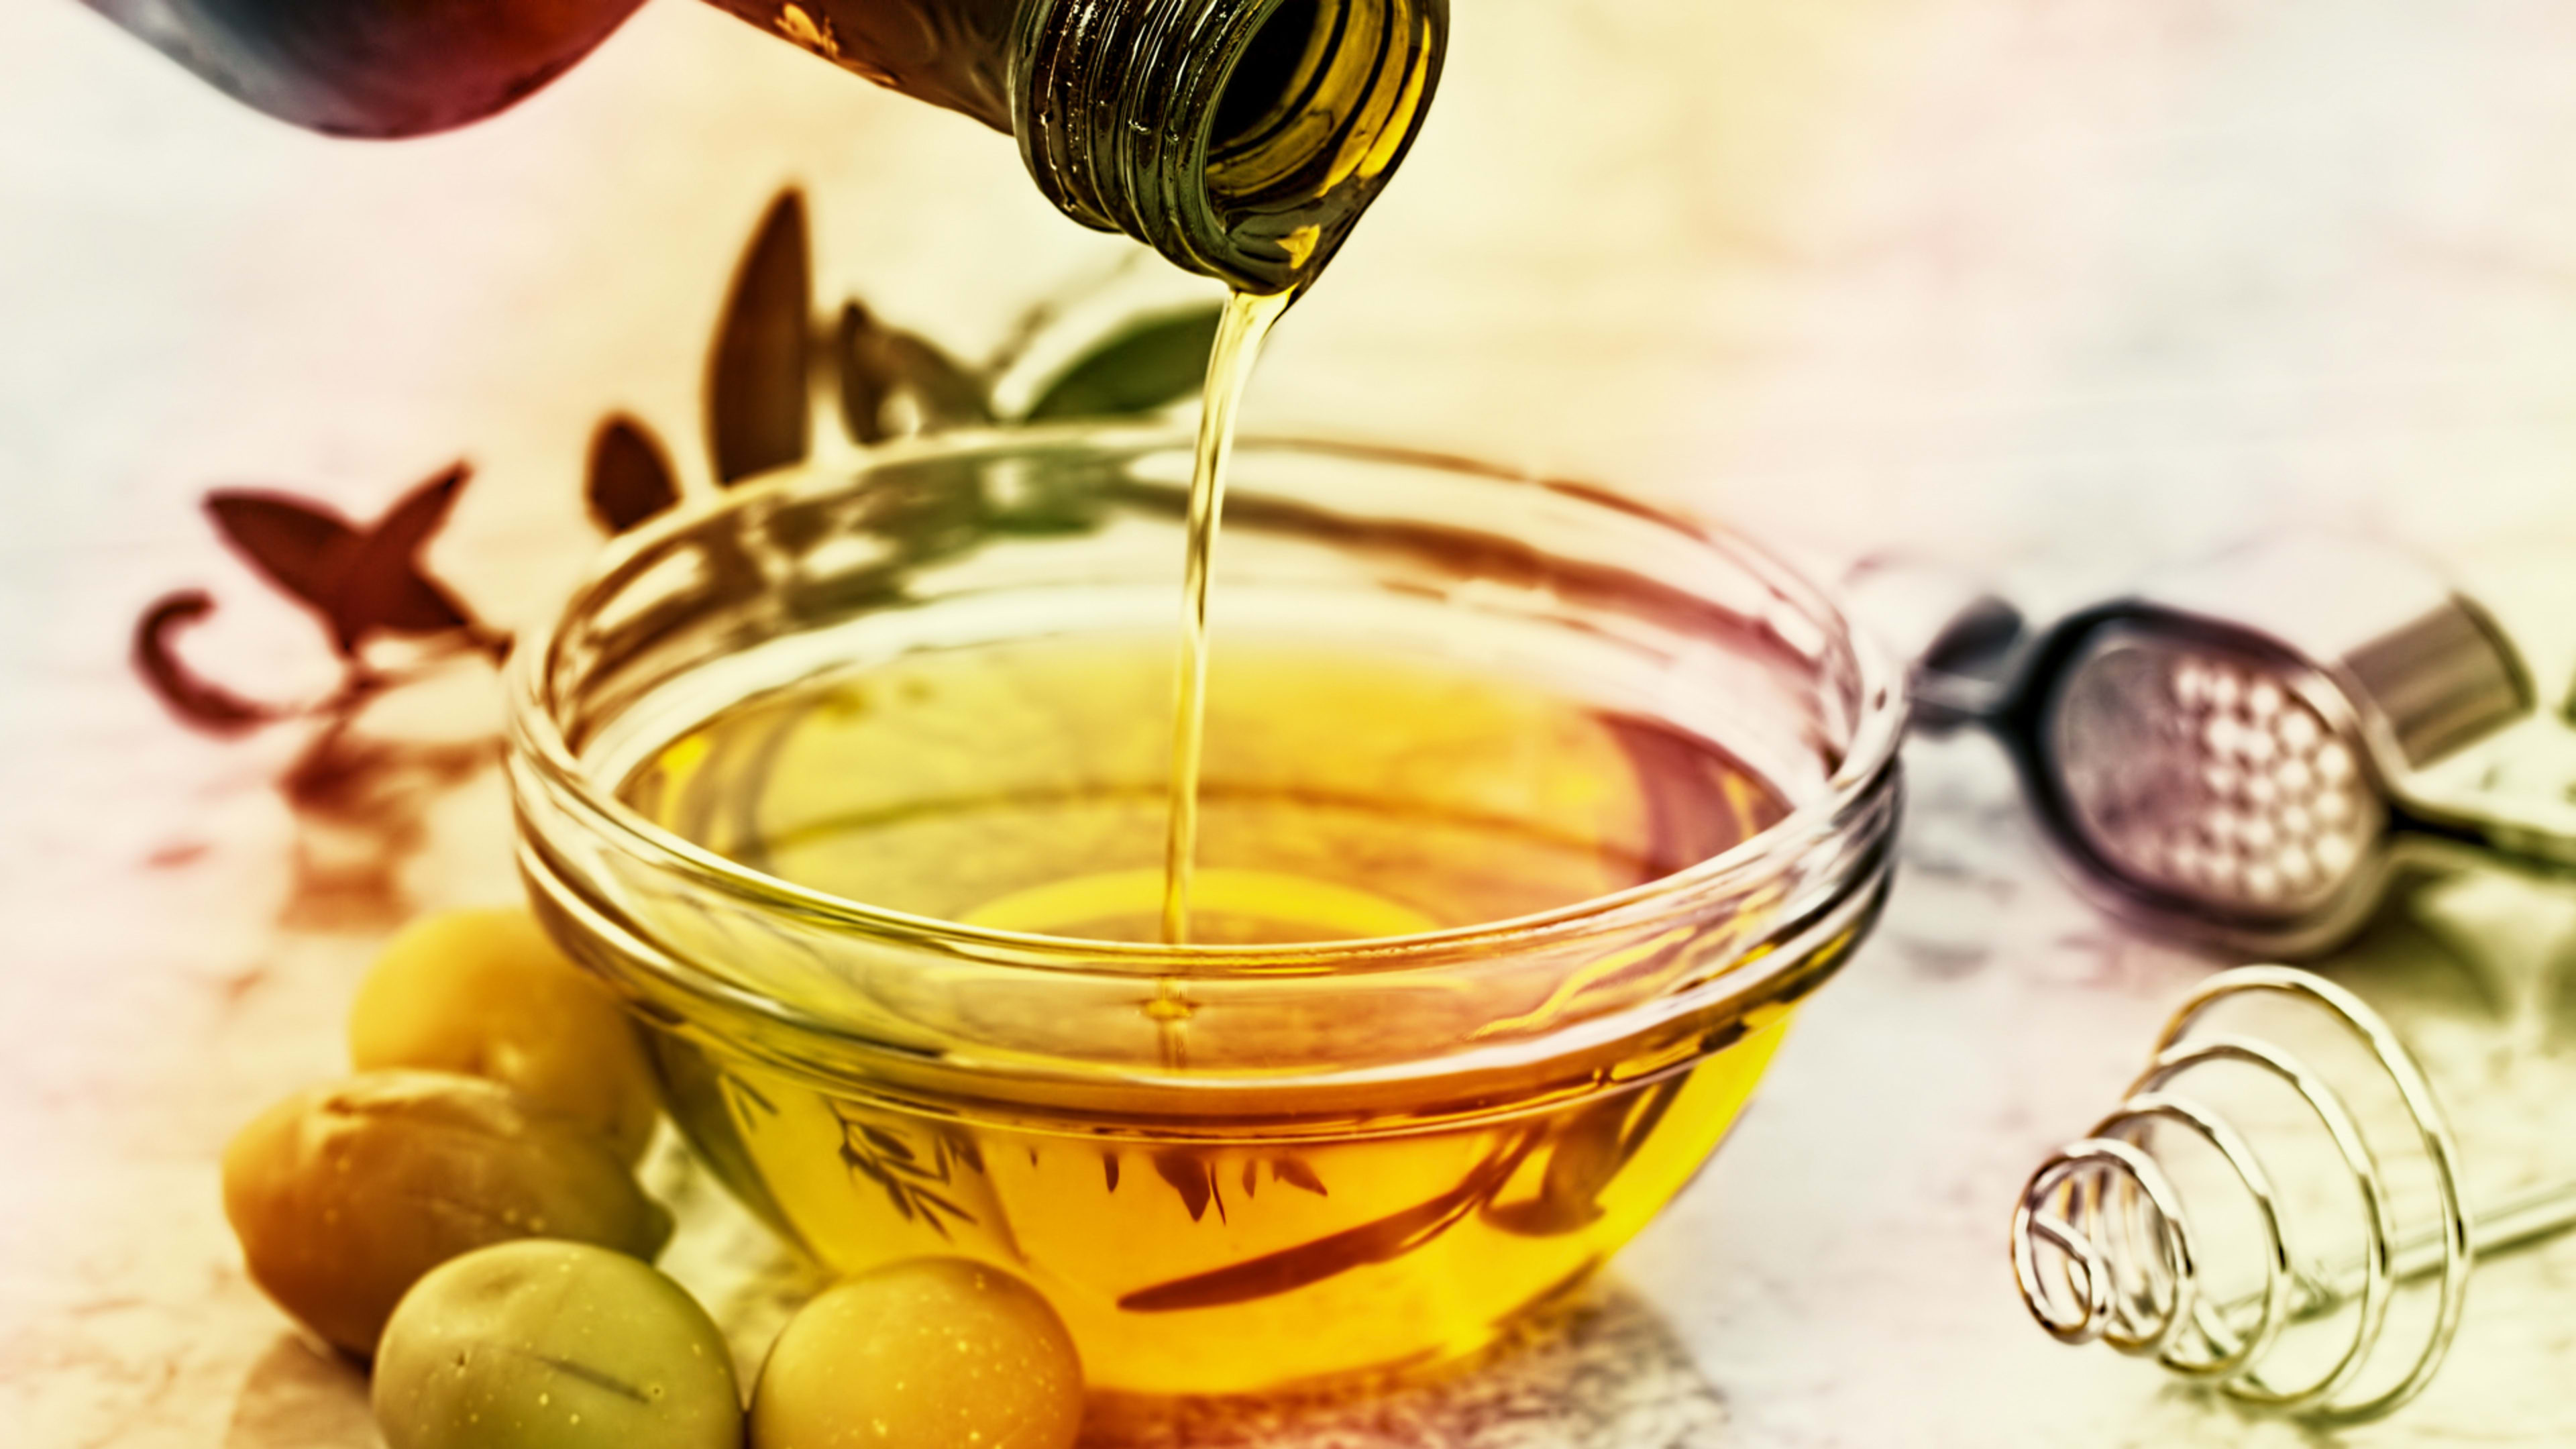 Is this olive oil fake? IBM will let you check using blockchain